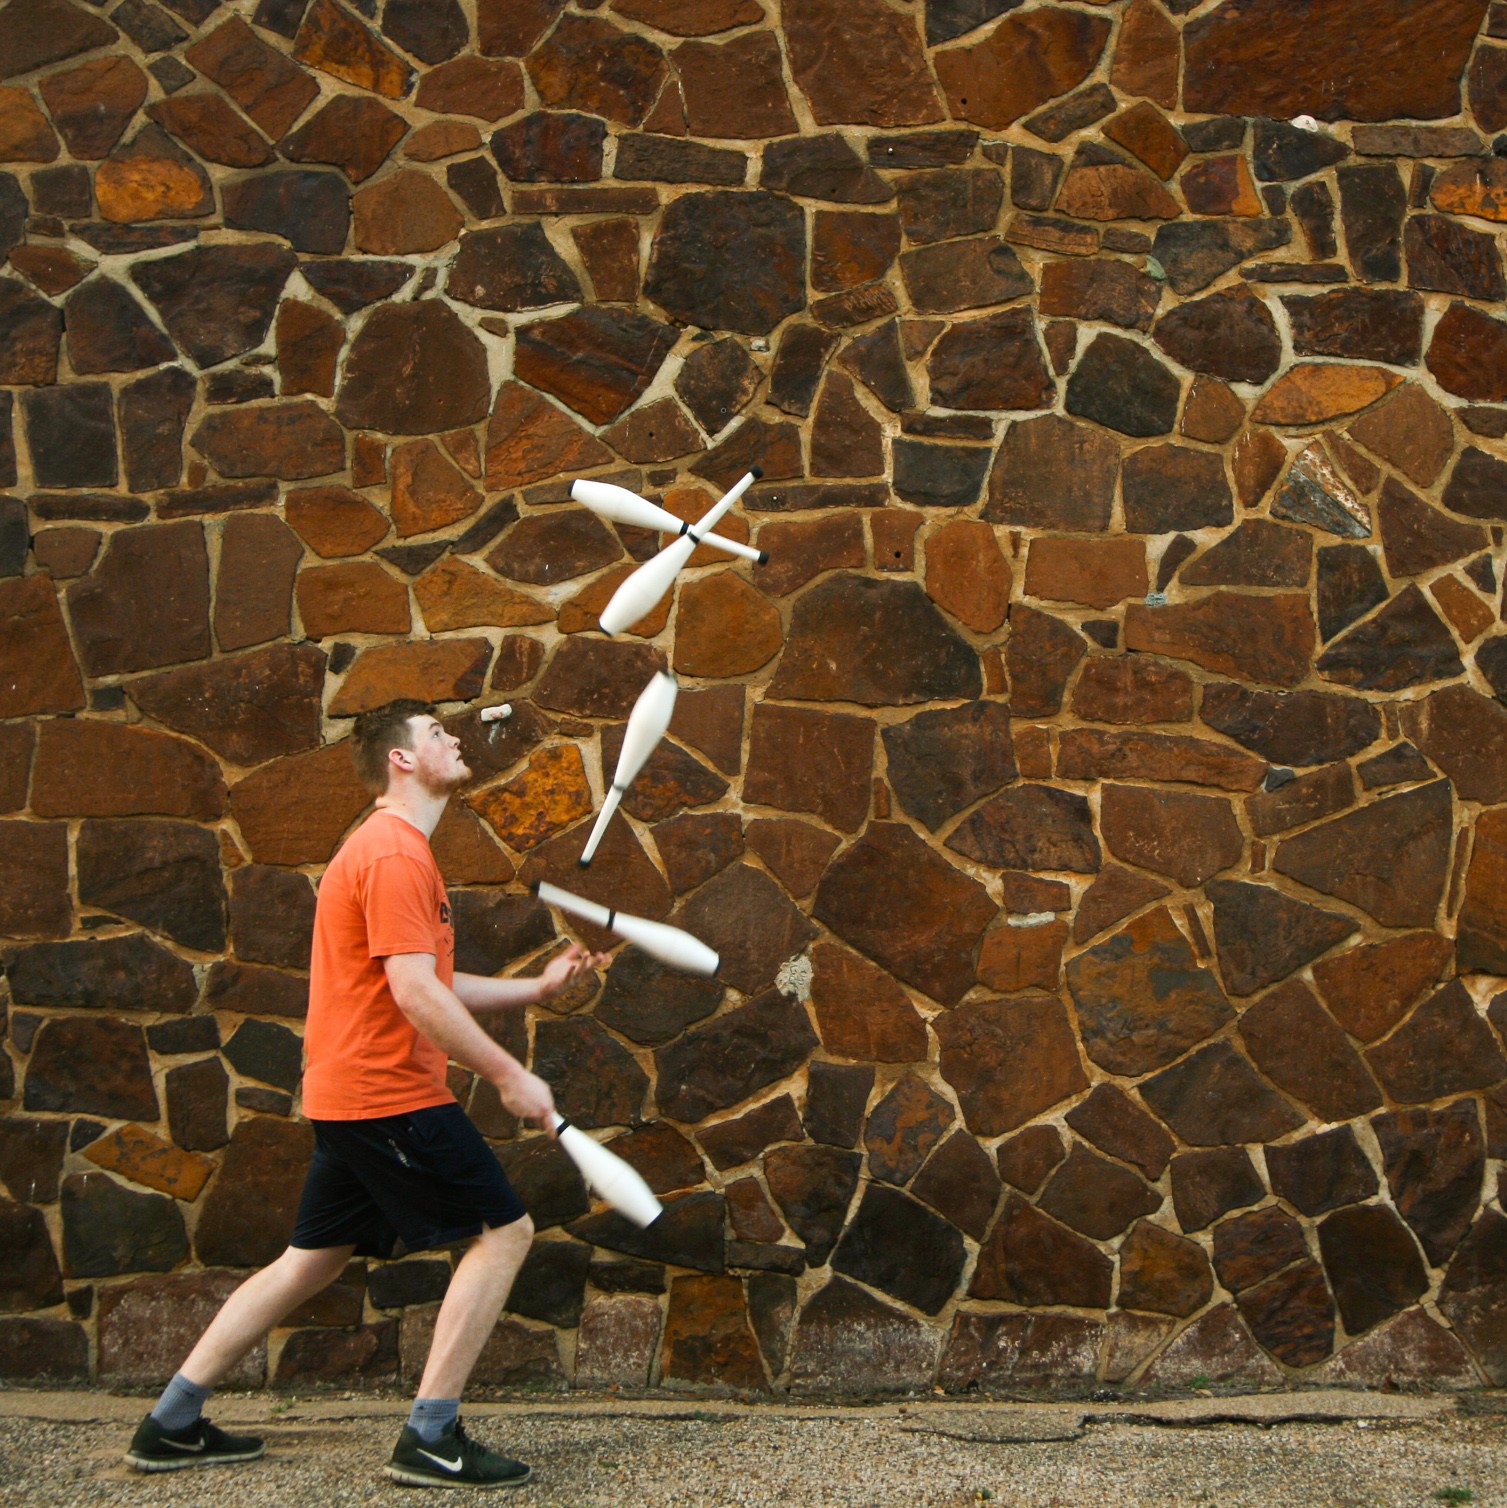 Spencer Androli juggling clubs next to stone wall